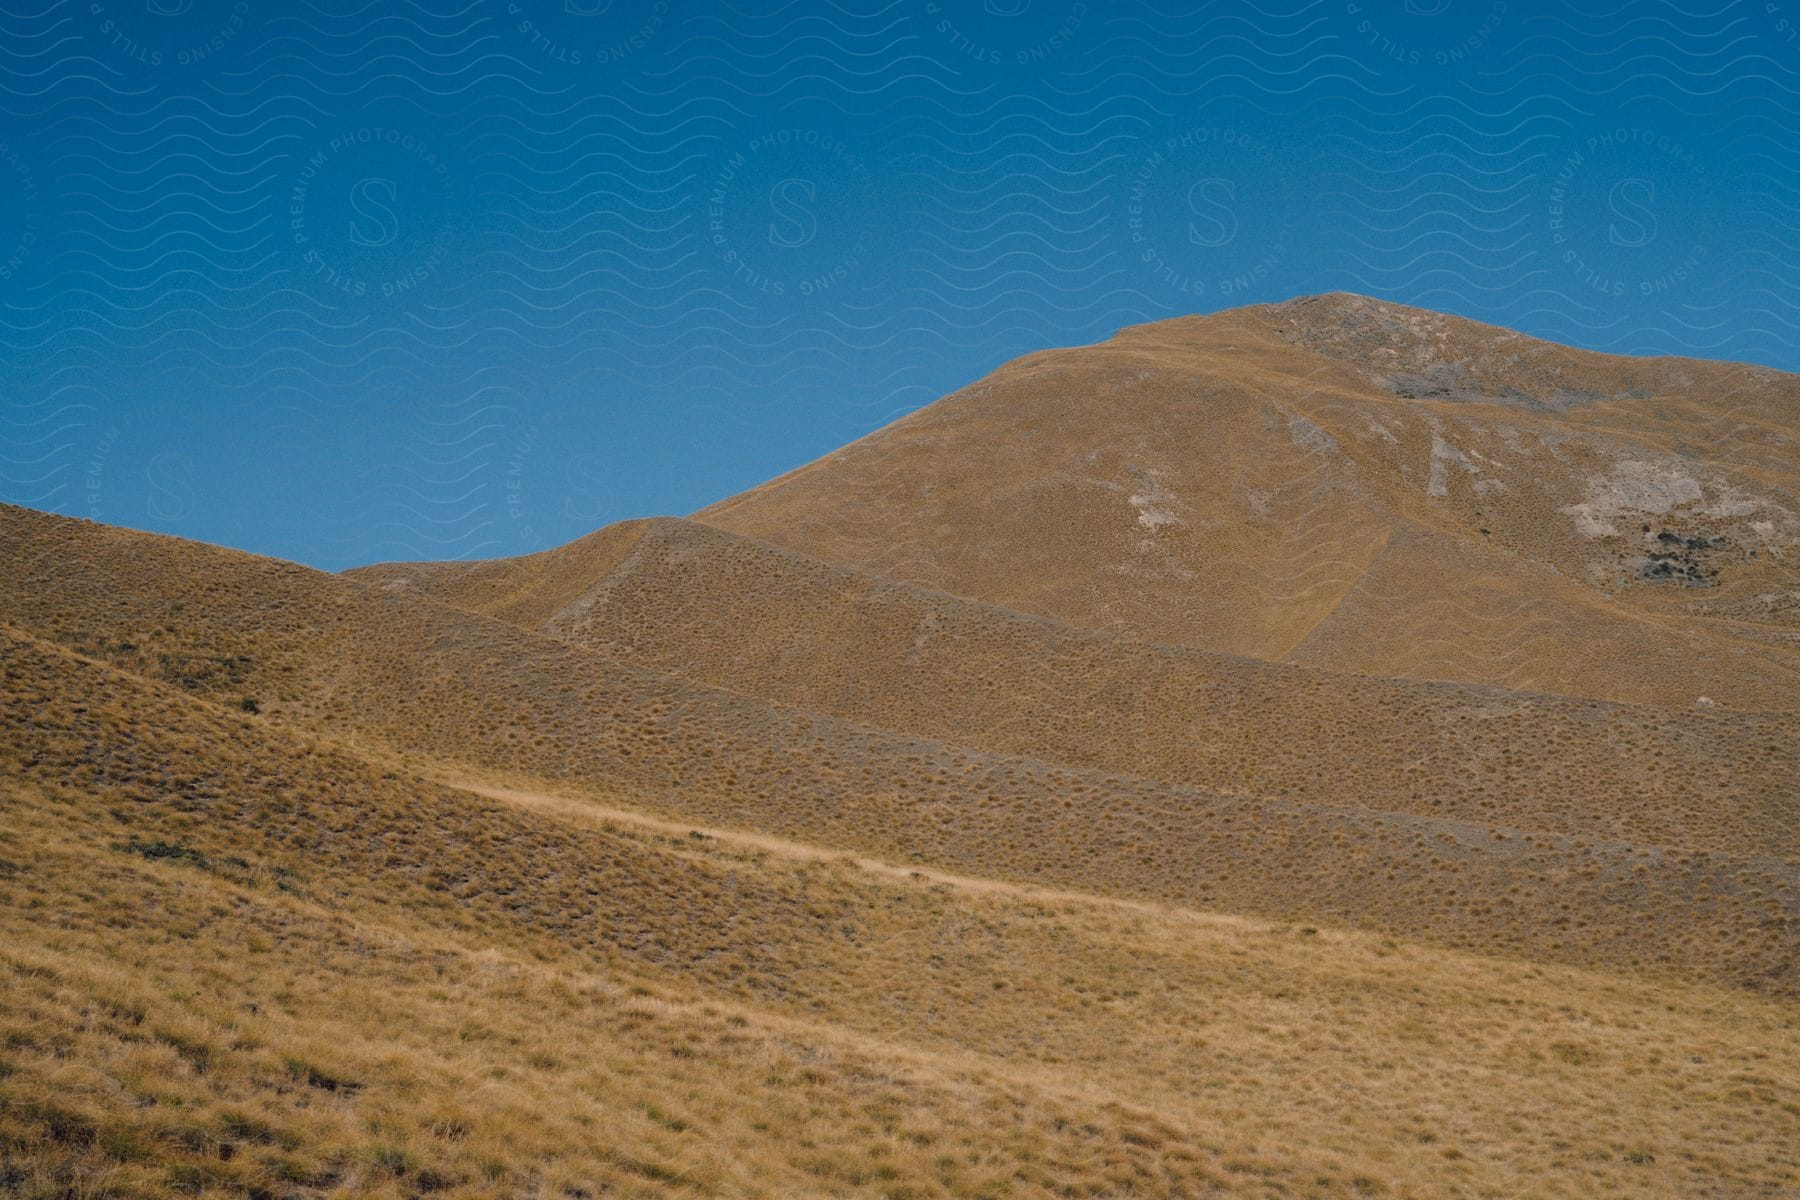 A large hill of land with low vegetation in contrast to blue sky